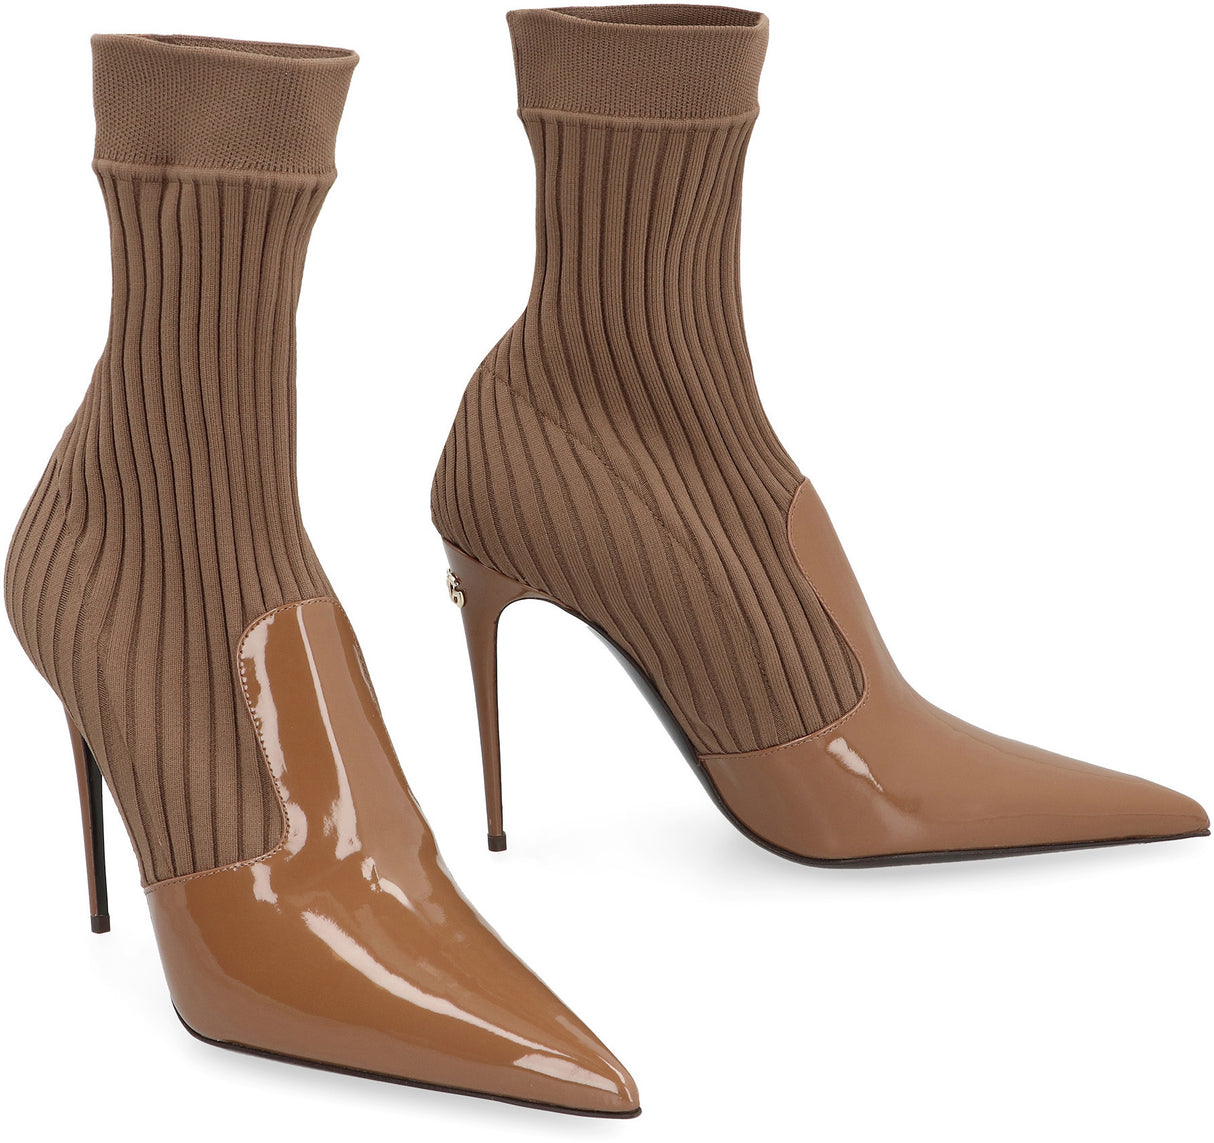 Calf Ankle Boots - Pointy Toe, Stiletto Heels, Camel, for Women